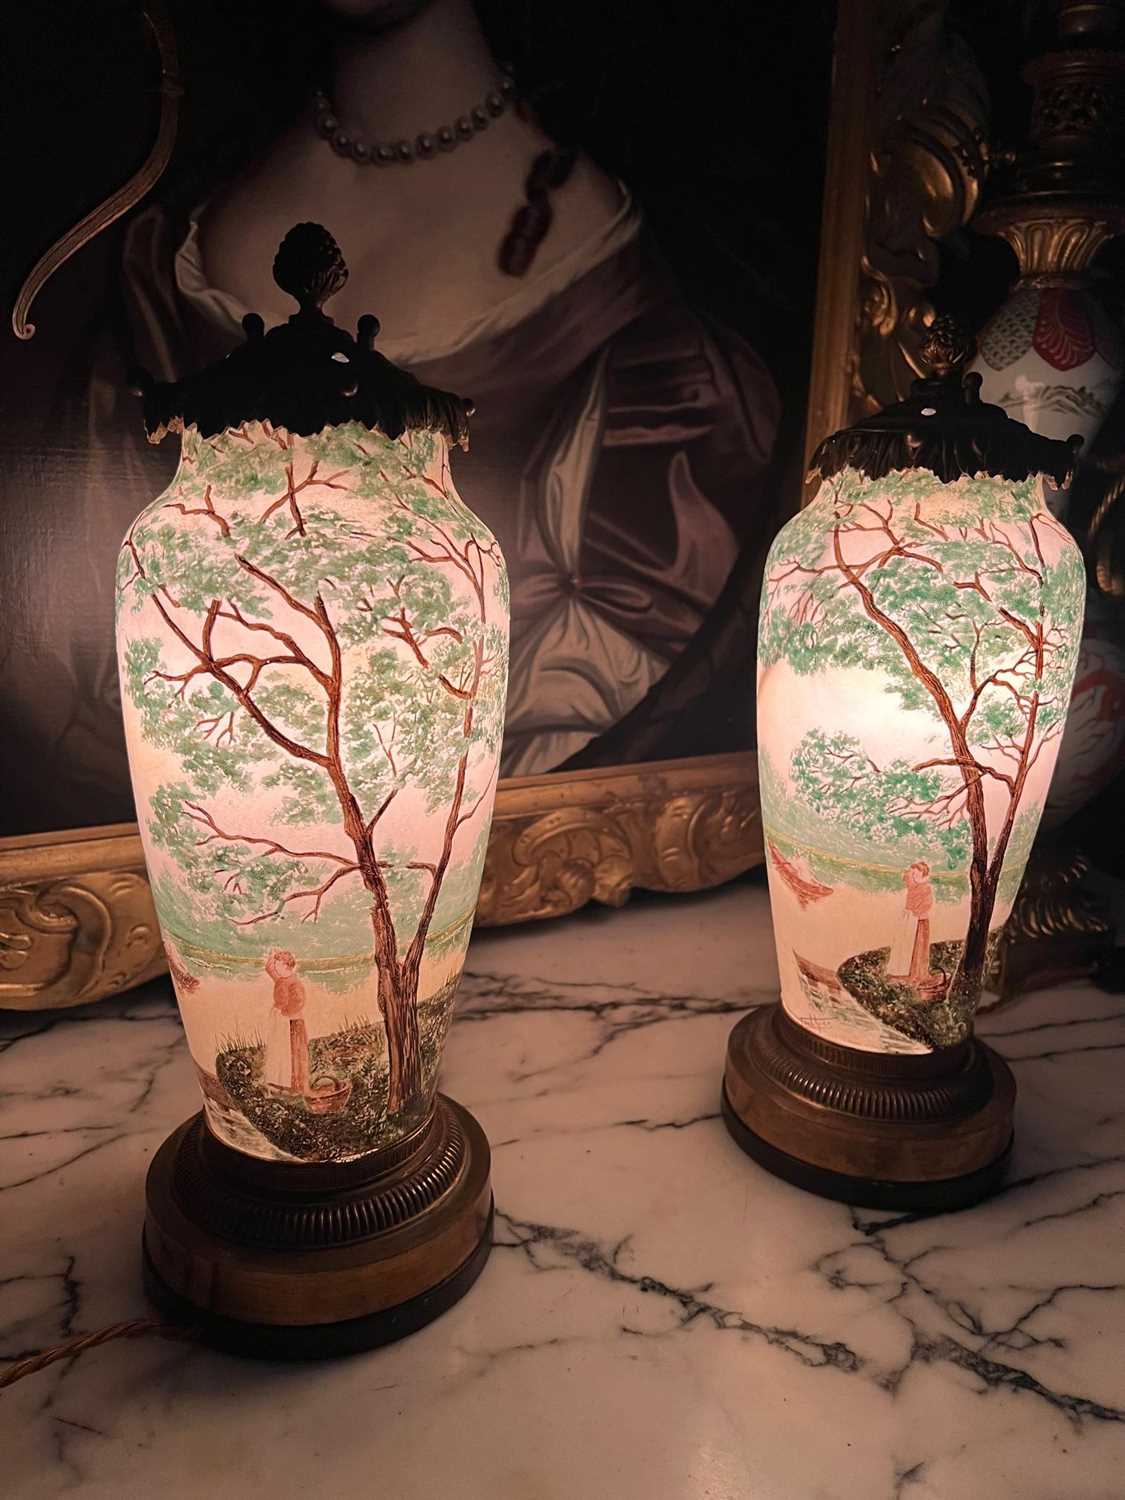 A PAIR OF LATE 19TH / EARLY 20TH CENTURY FRENCH ART GLASS LAMPS - Image 5 of 7